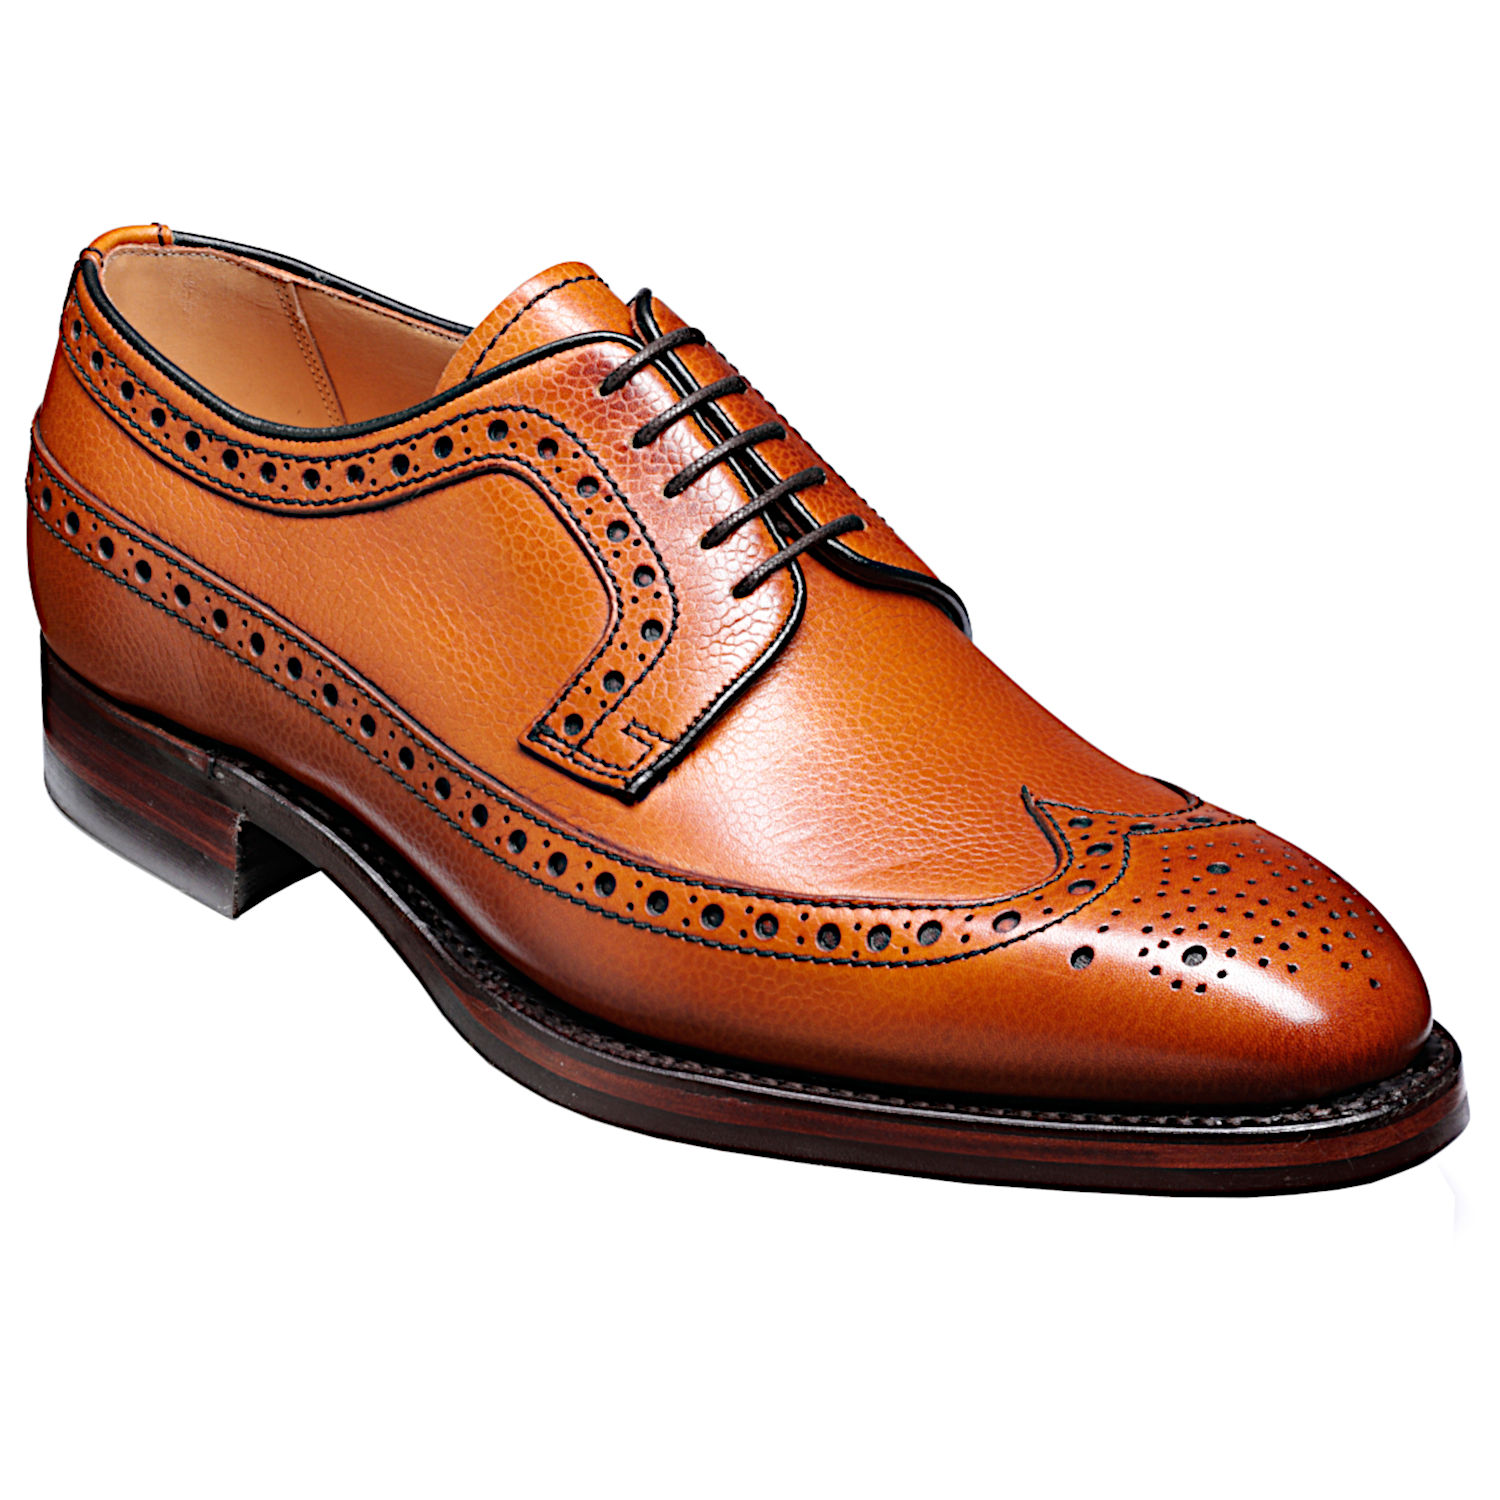 barkers mens shoes uk